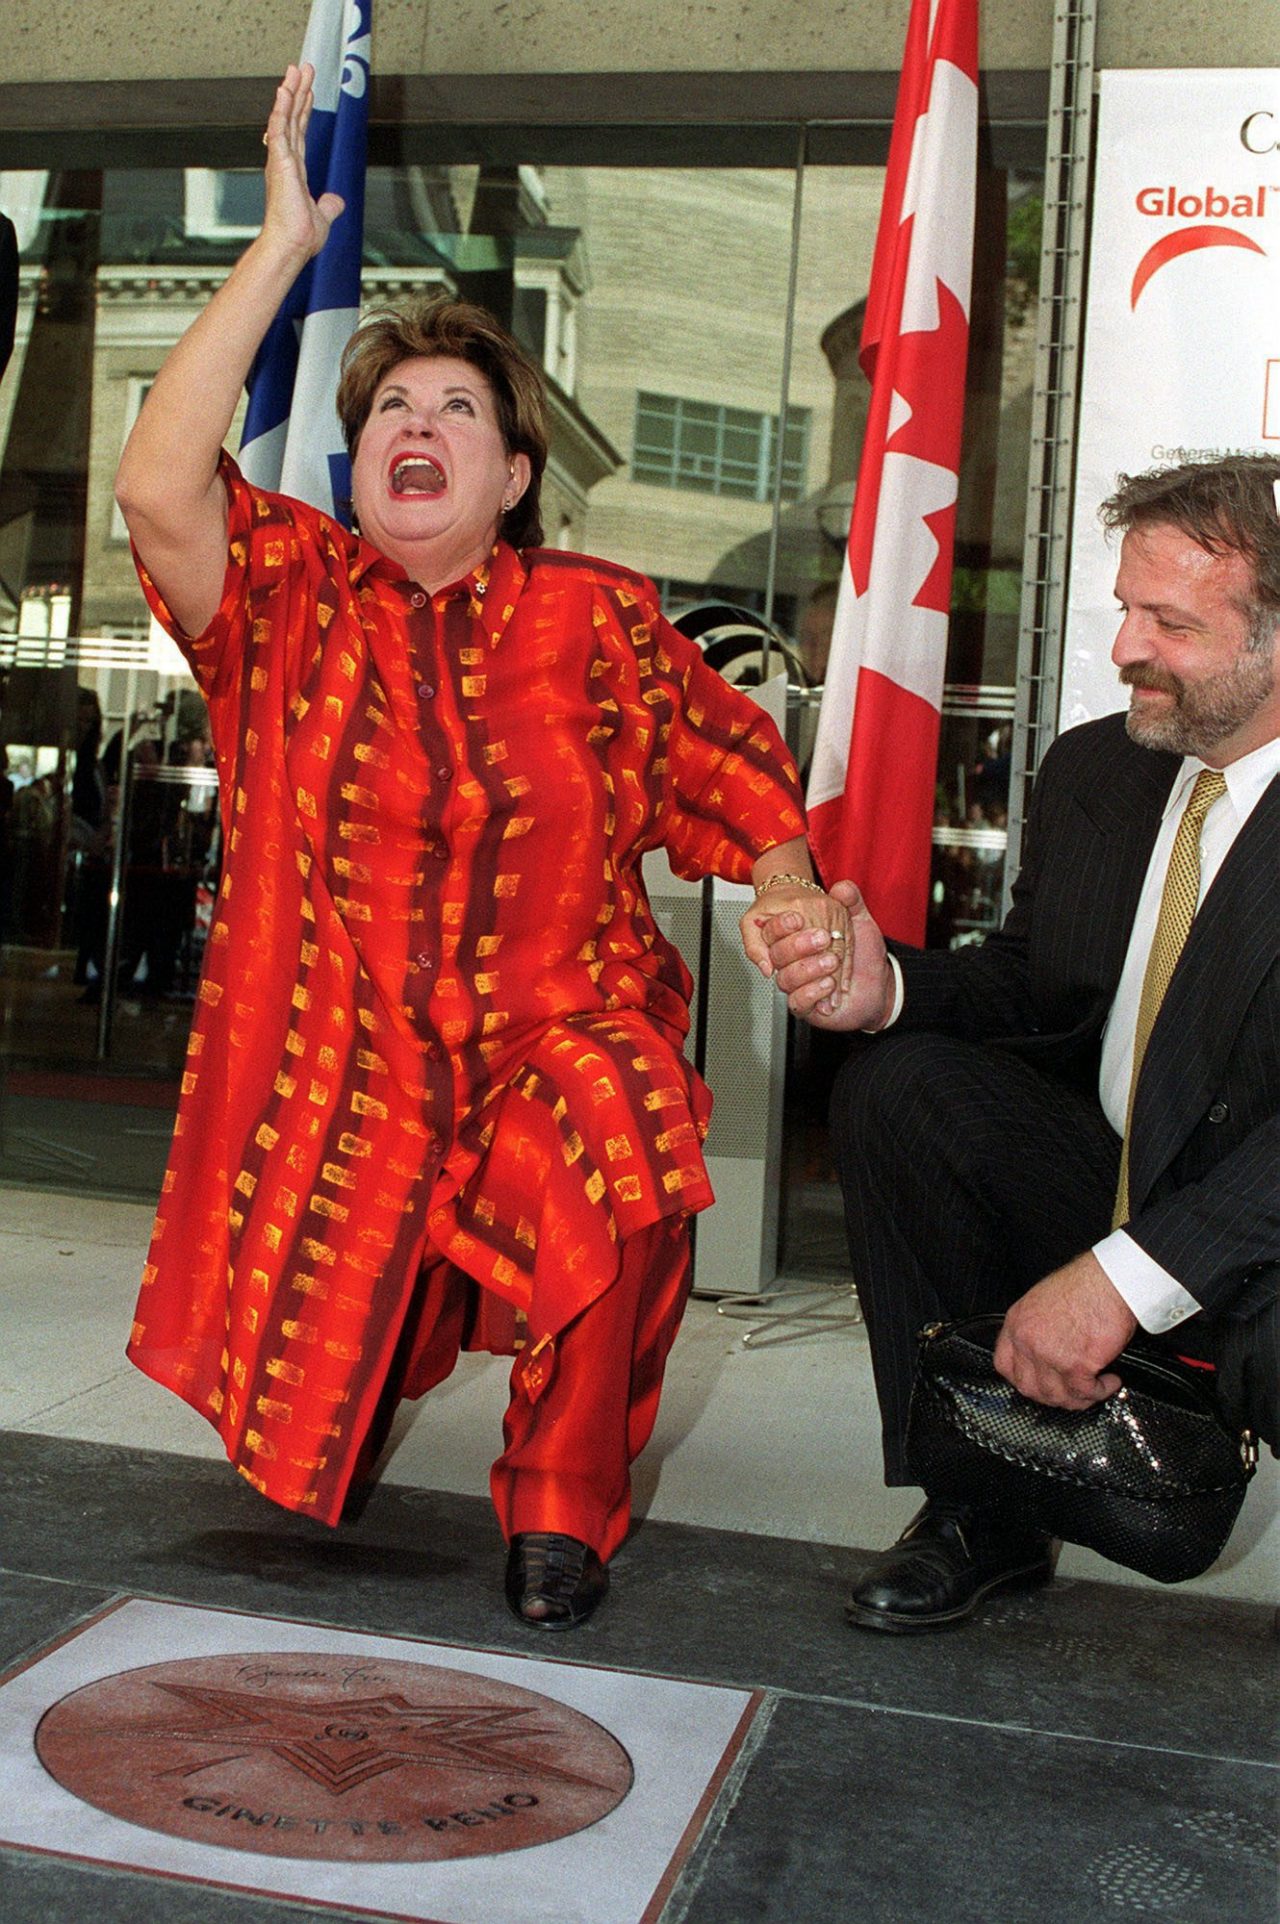 Ginette Reno receives her star on Canada's Walk of Fame Friday, June 23, 2000. Man at right is unidentified. (CP PHOTO/Tannis Toohey)